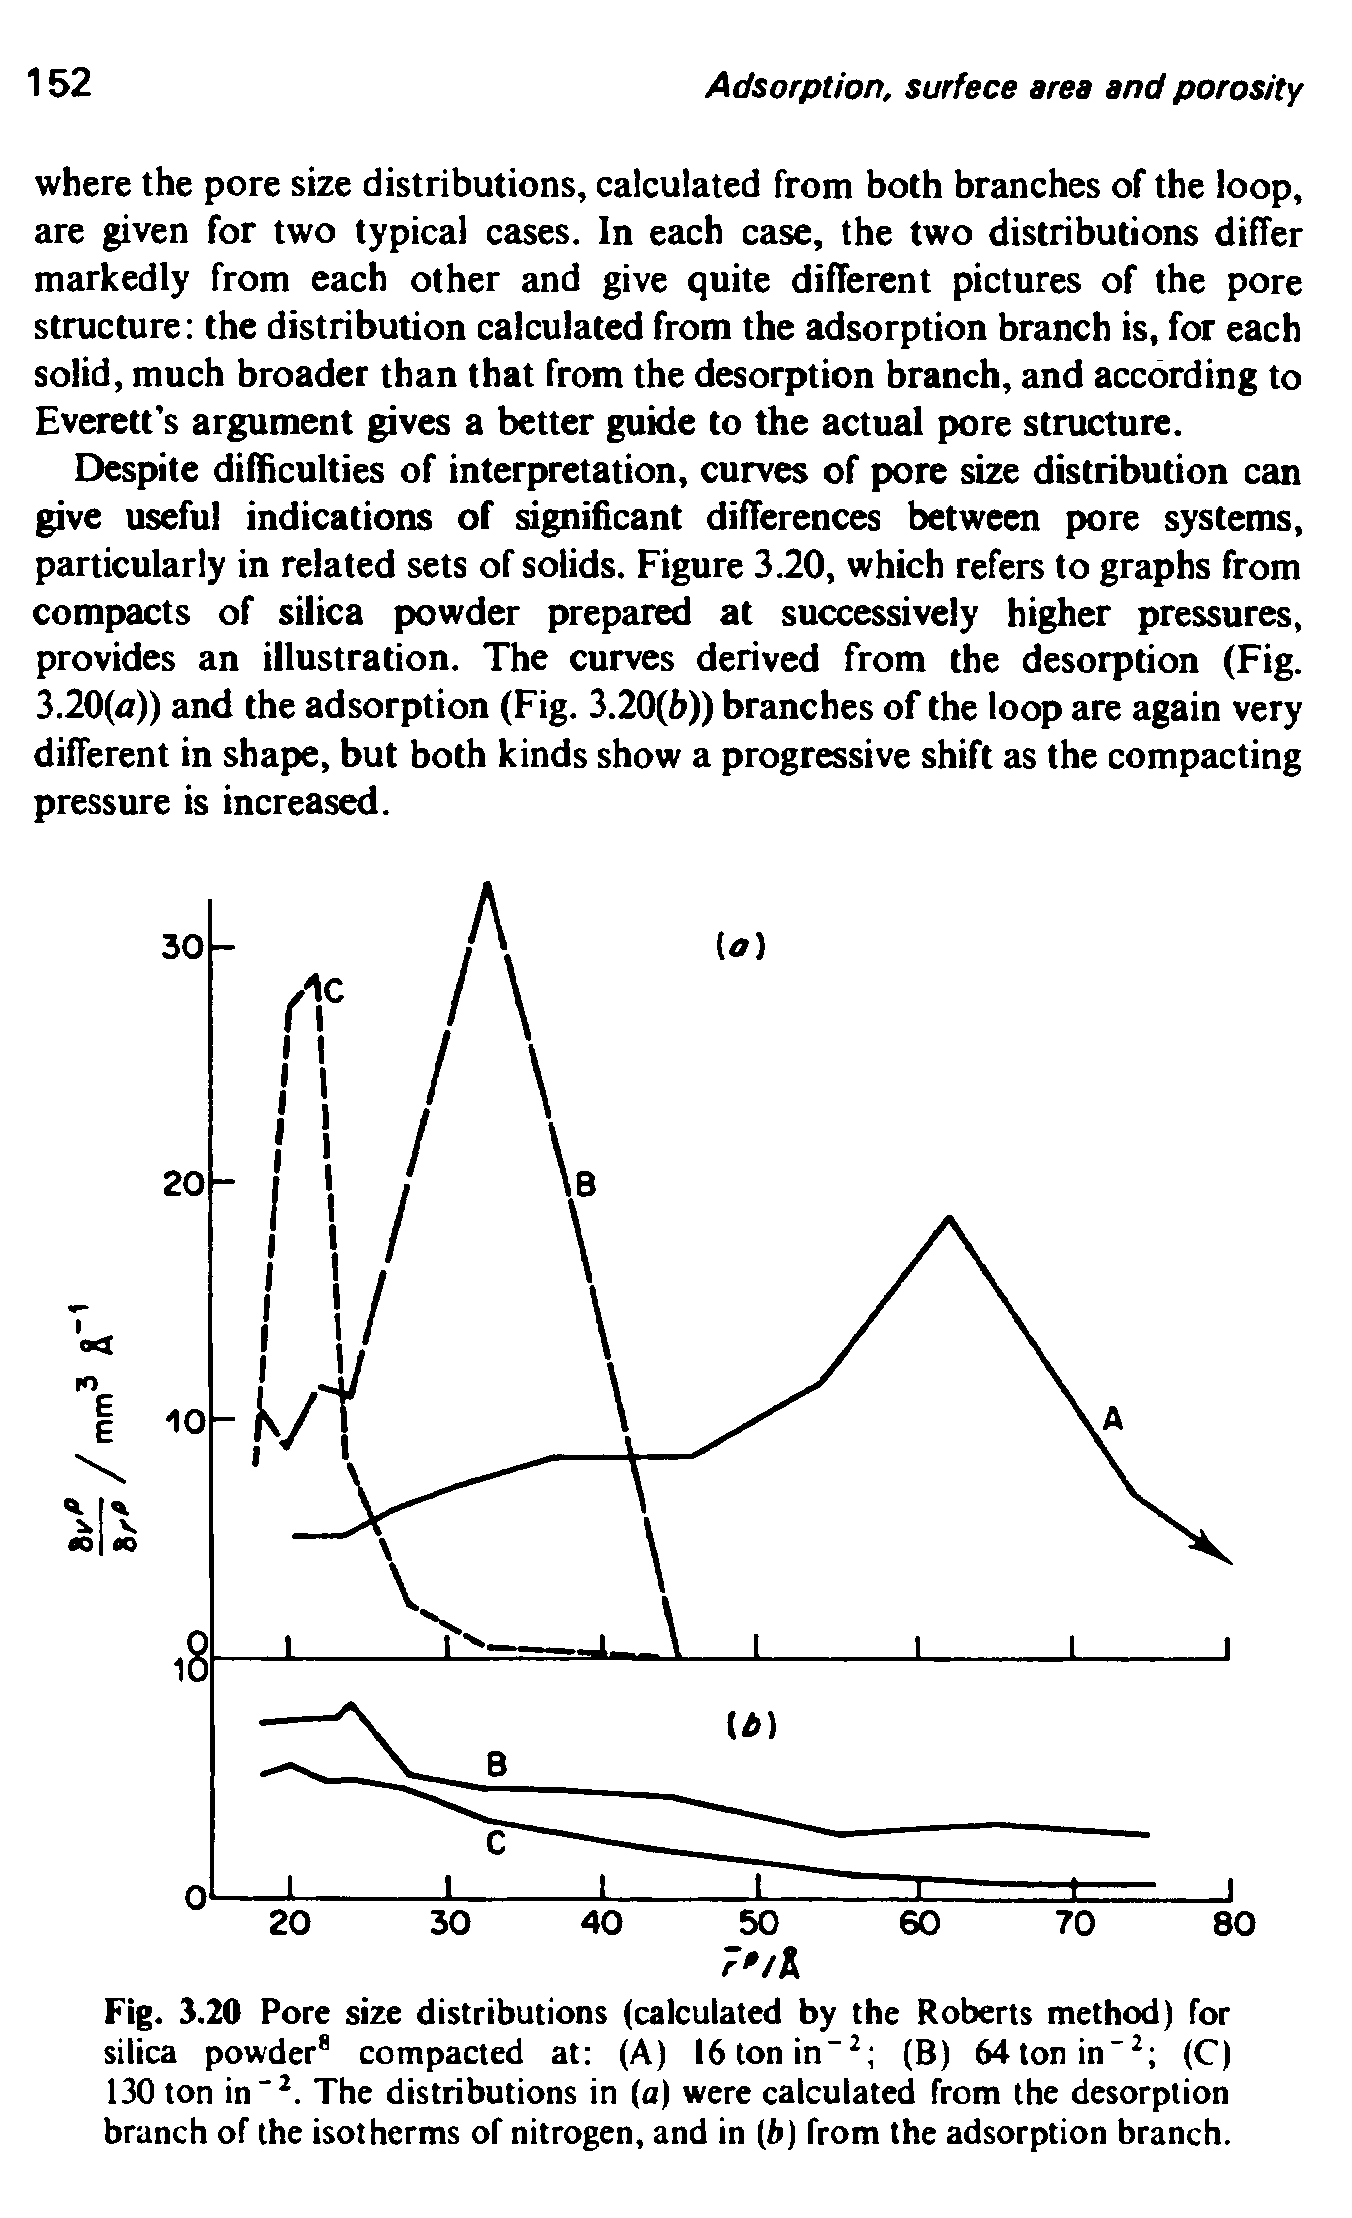 Fig. 3.20 Pore size distributions (calculated by the Roberts method) for silica powder compacted at (A) Ibtonin" (B) 64tonin (C) 130 ton in". The distributions in (a) were calculated from the desorption brunch of the isotherms of nitrogen, and in (h) from the adsorption branch.